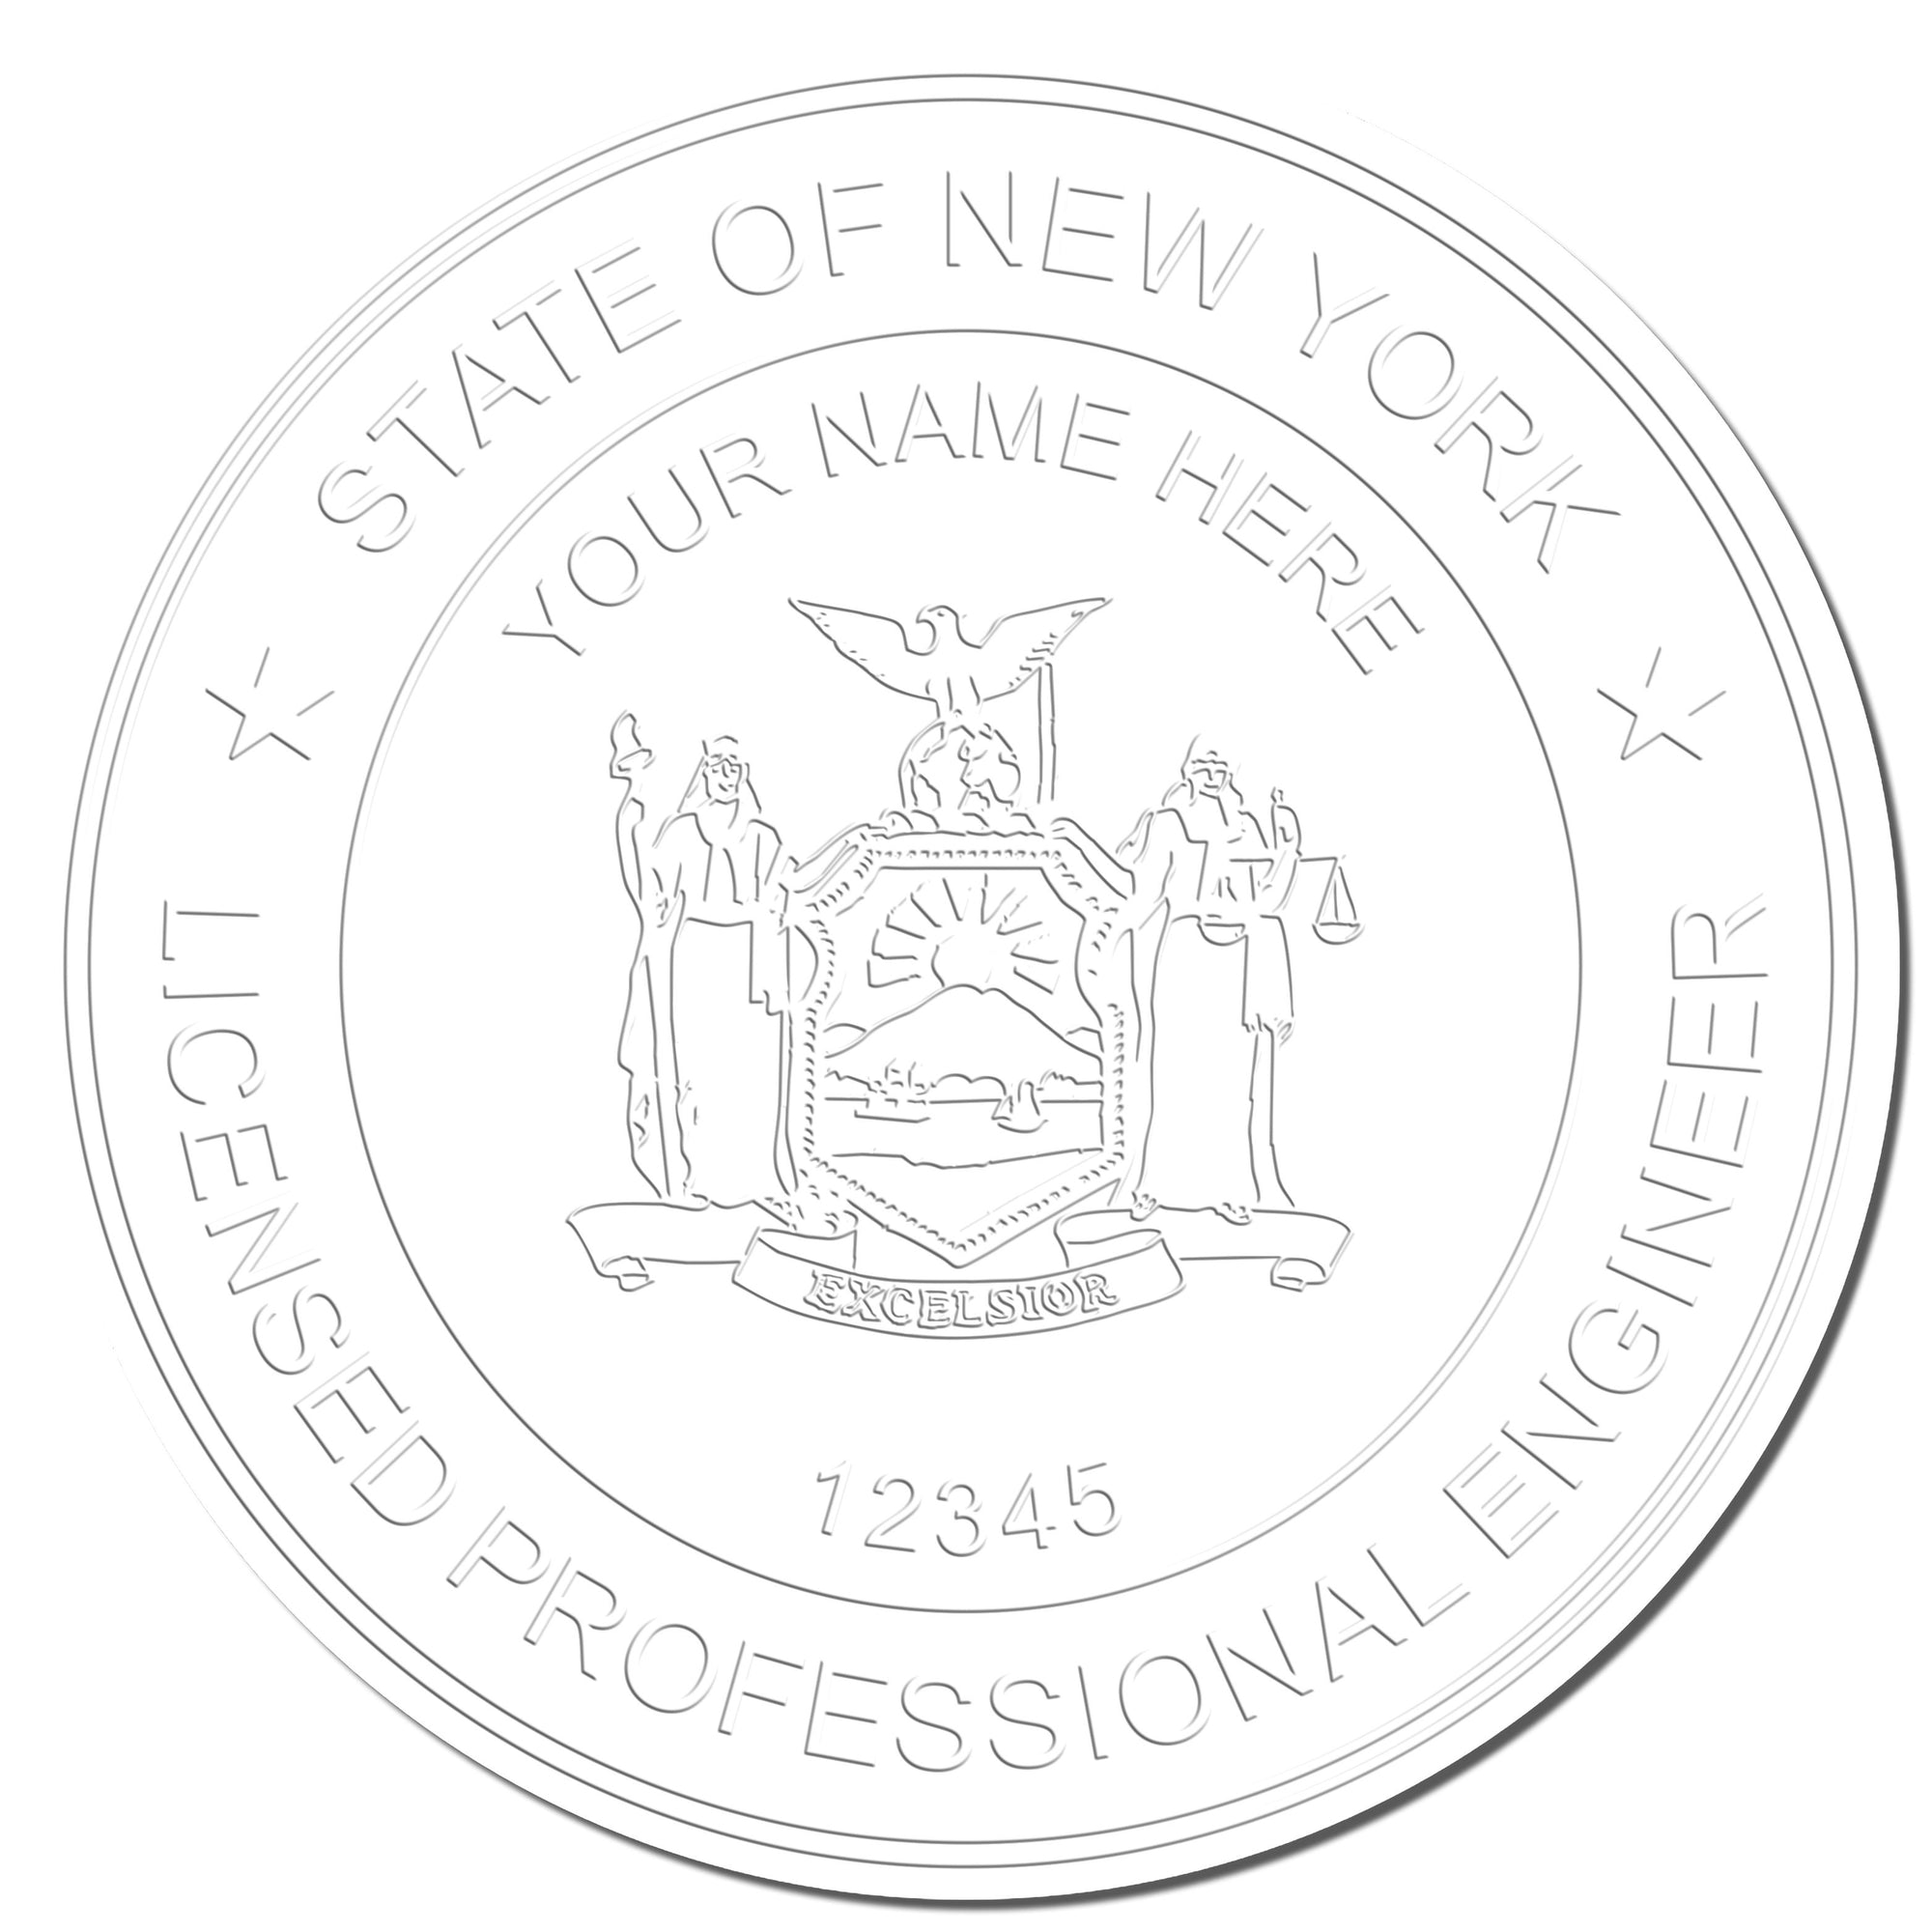 The main image for the New York Engineer Desk Seal depicting a sample of the imprint and electronic files